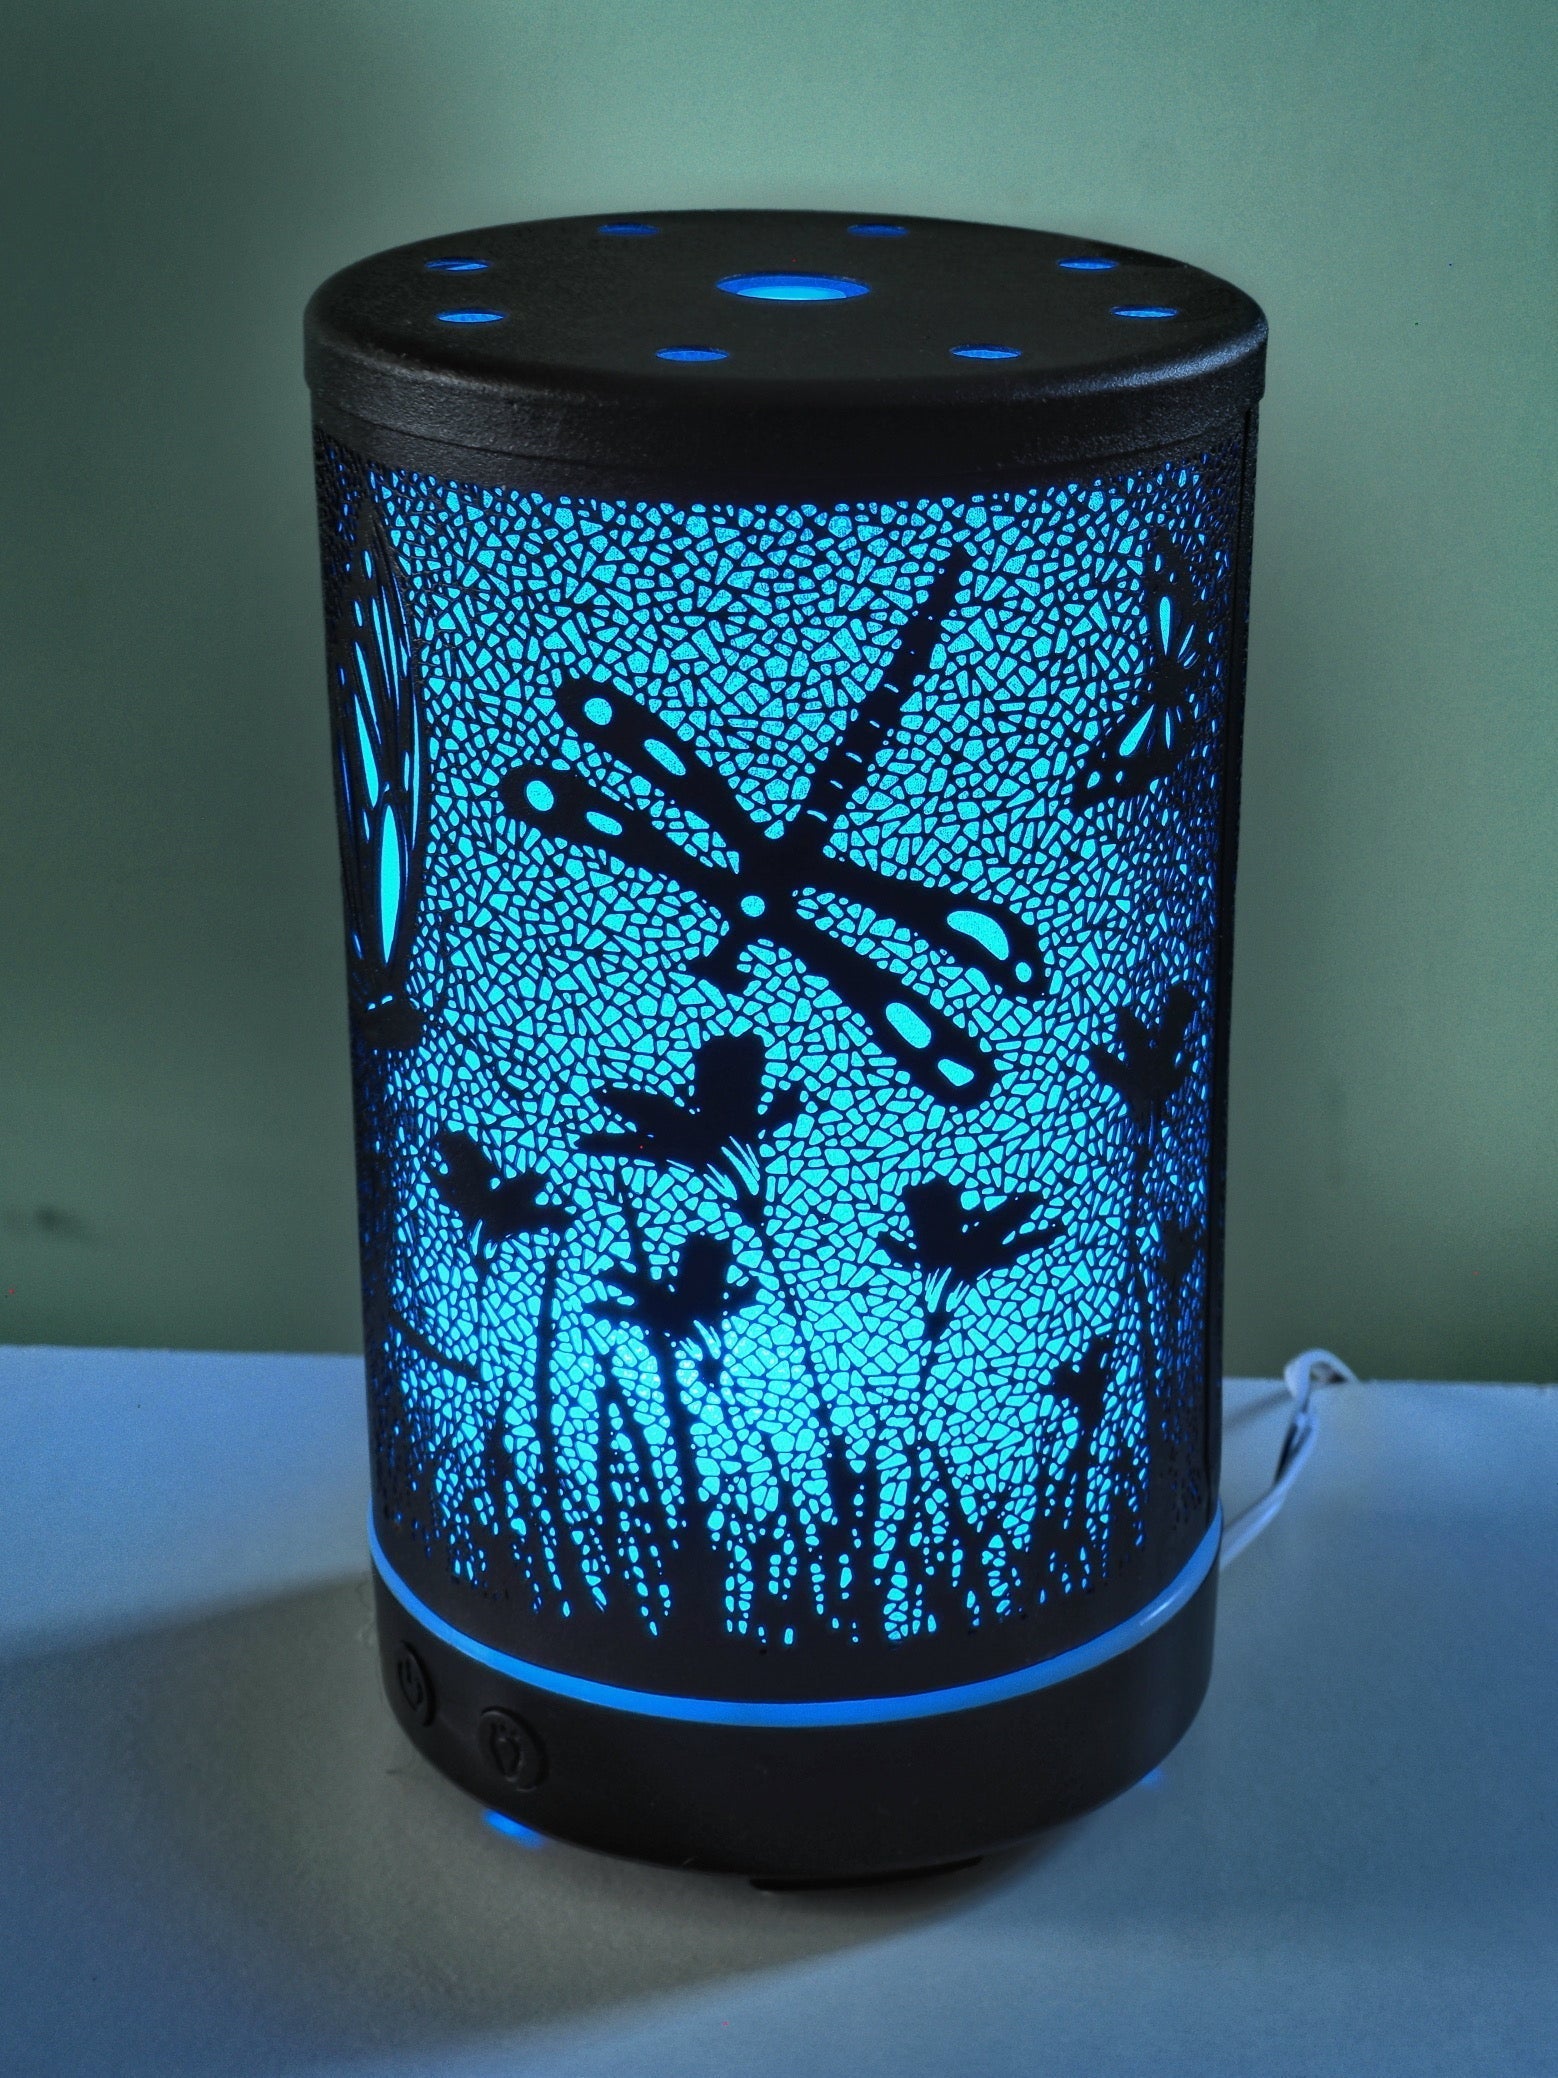 Aromatherapy device spreading calm with butterflies and dragonflies.